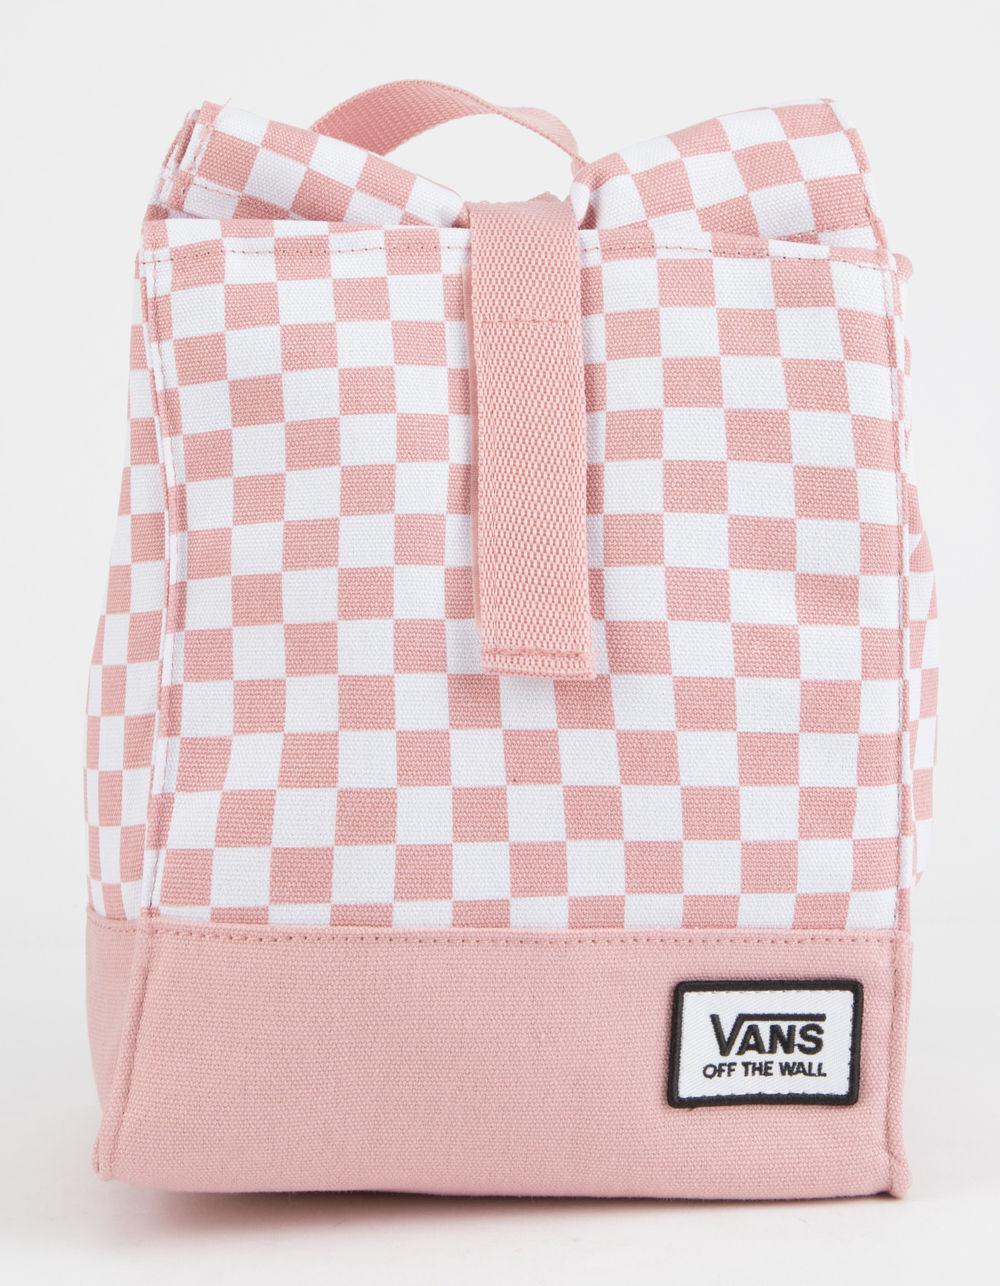 vans off the wall lunch box